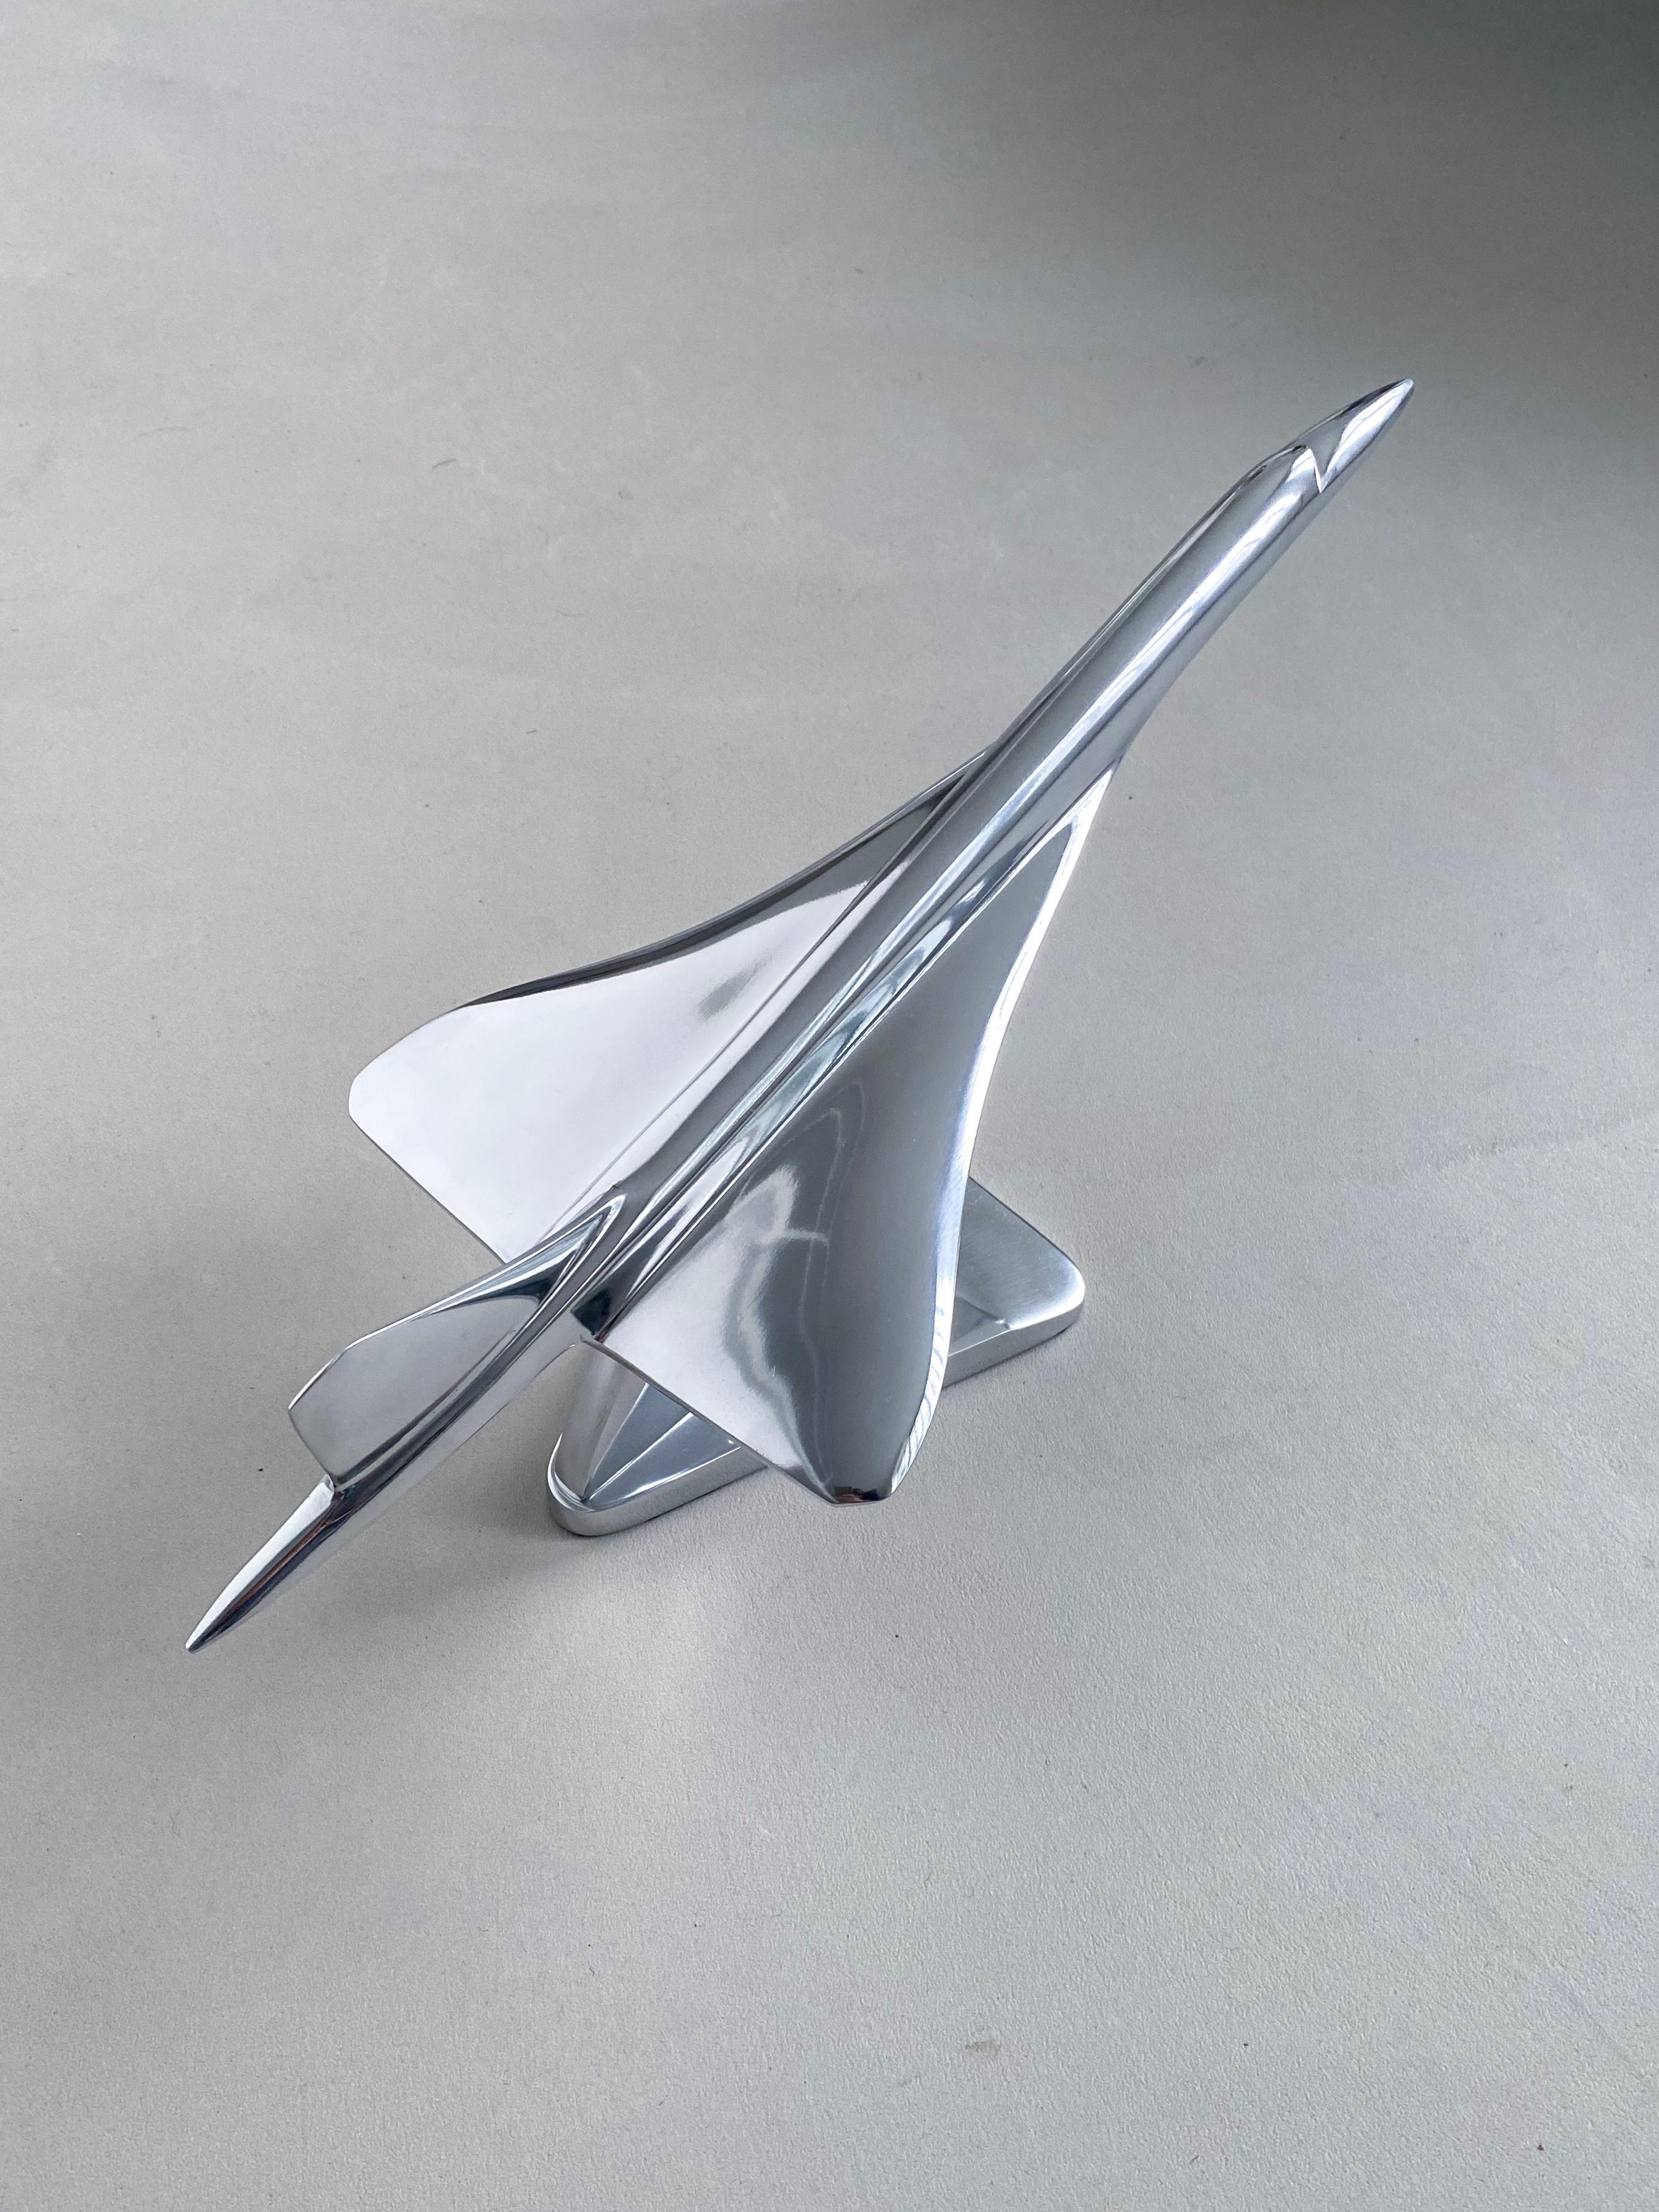 Concorde Supersonic Plane Display Mounted Sculpture in Polished Stainless Steel For Sale 1